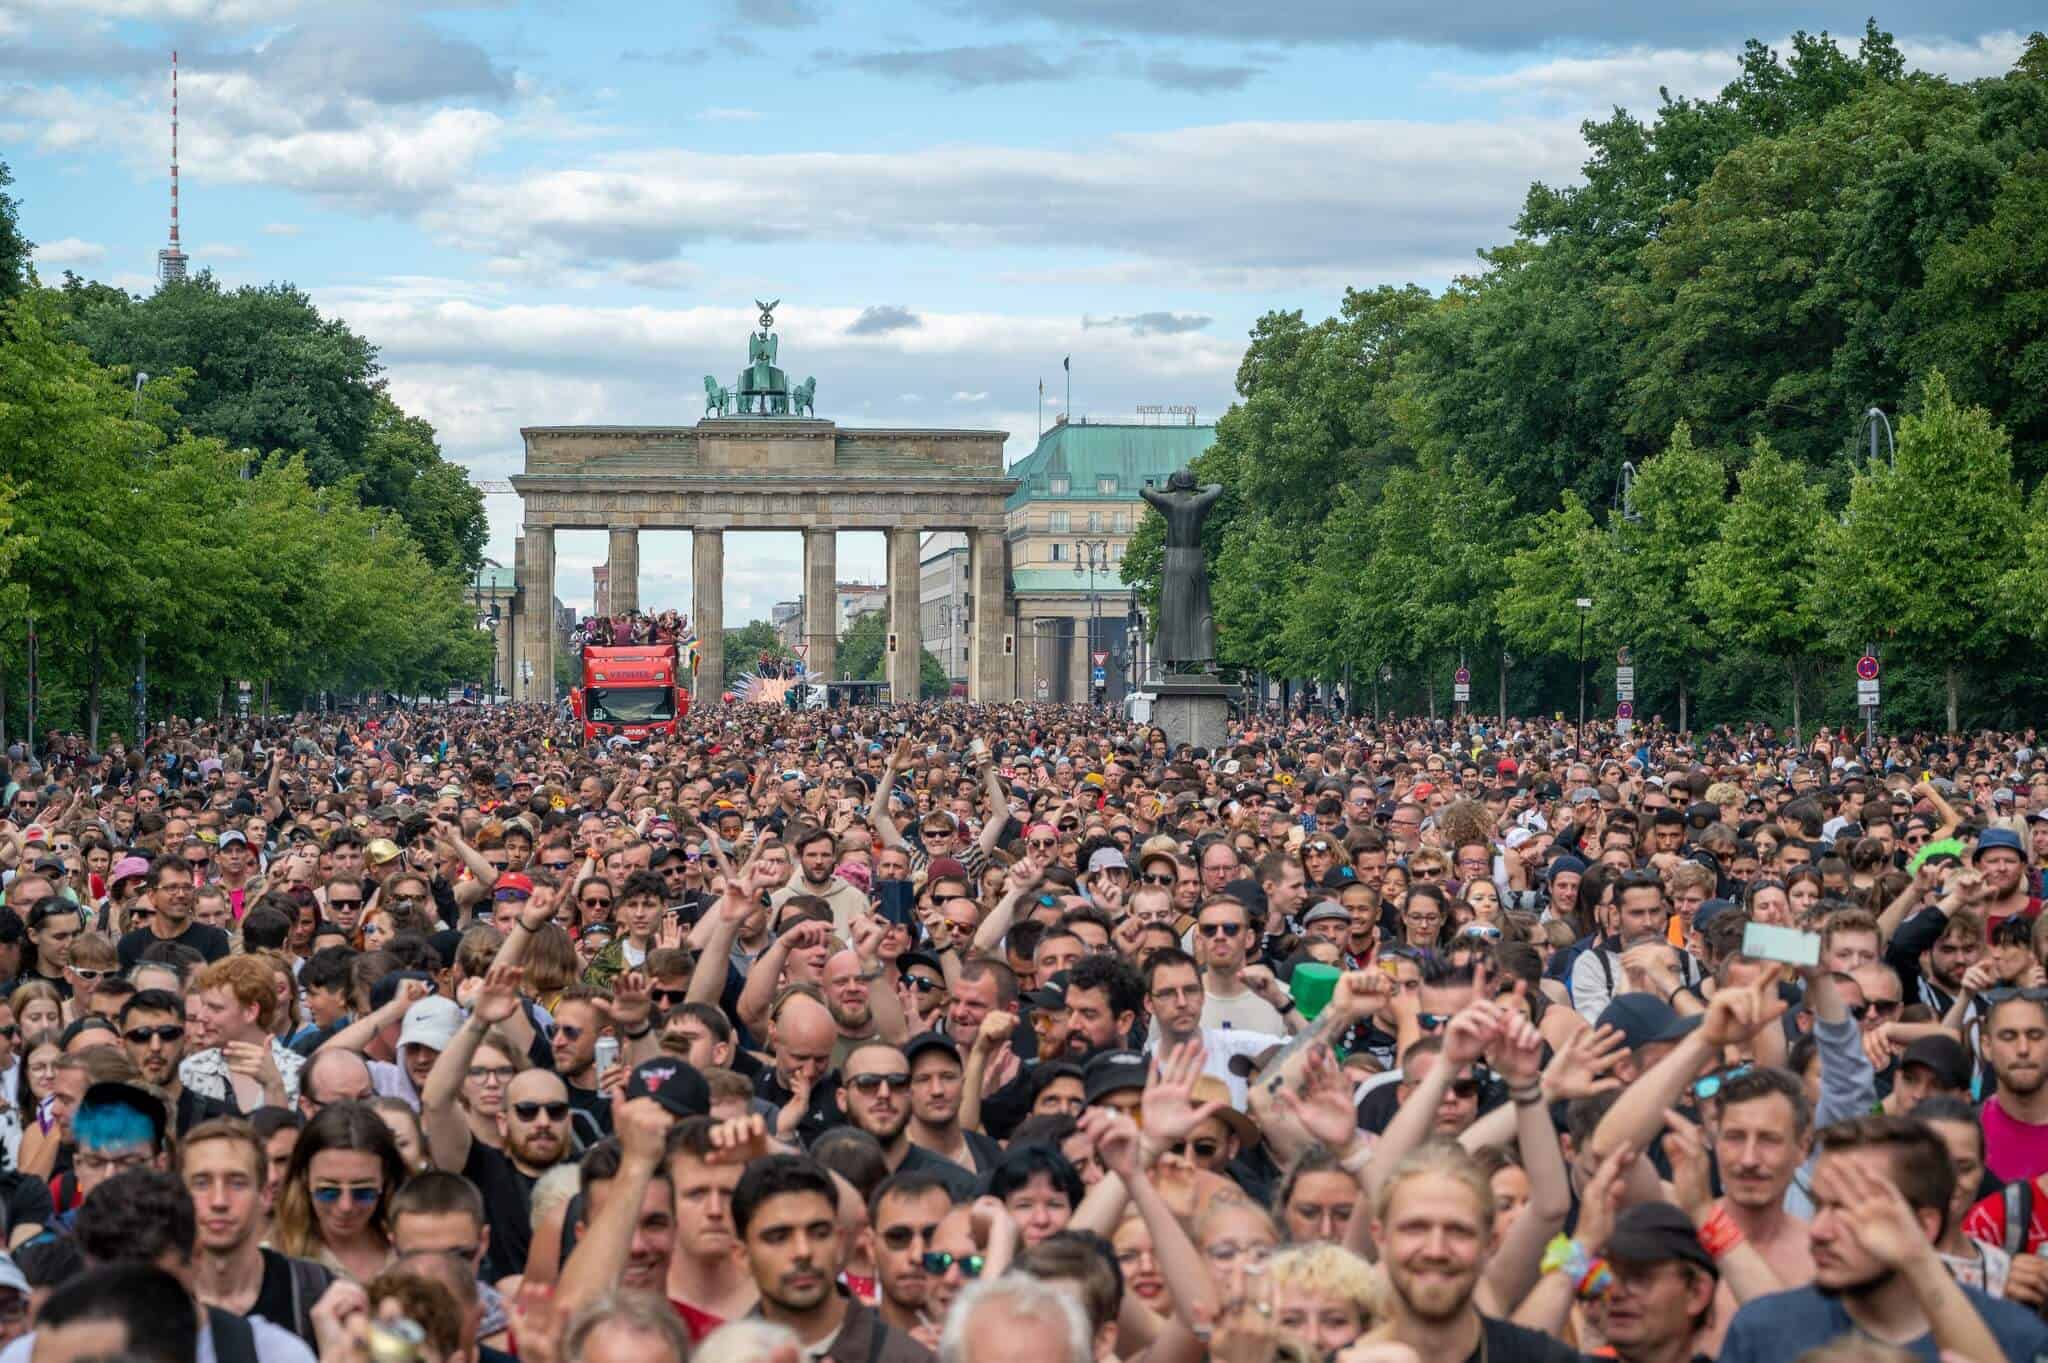 200,000 people gather in streets of Berlin for Rave The Planet Parade